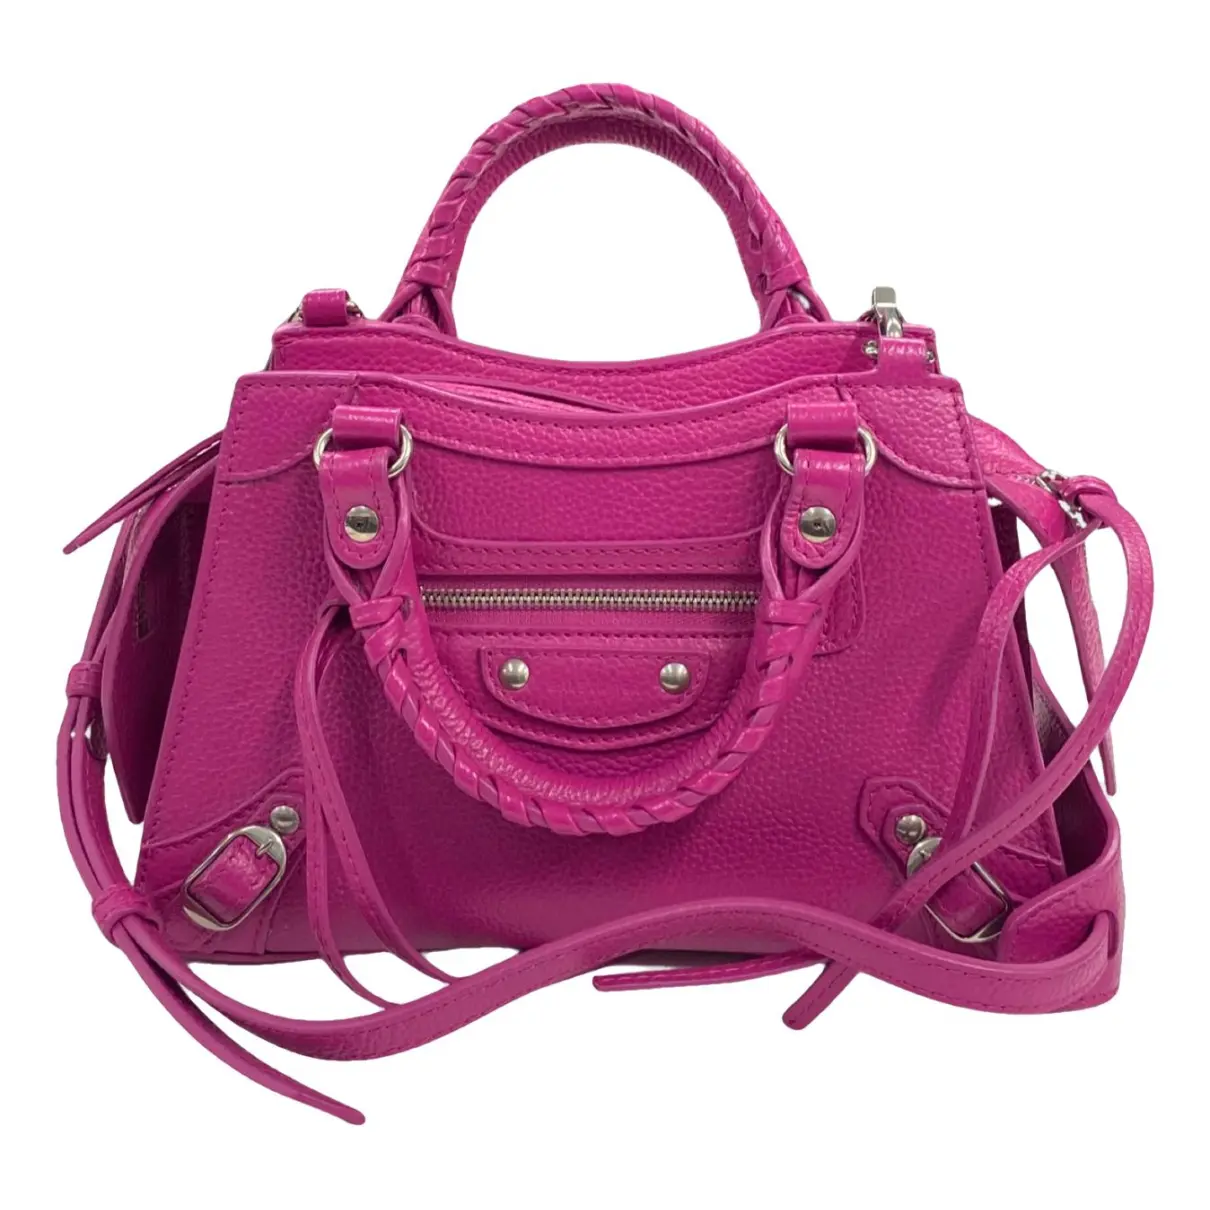 Neo Classic leather bag